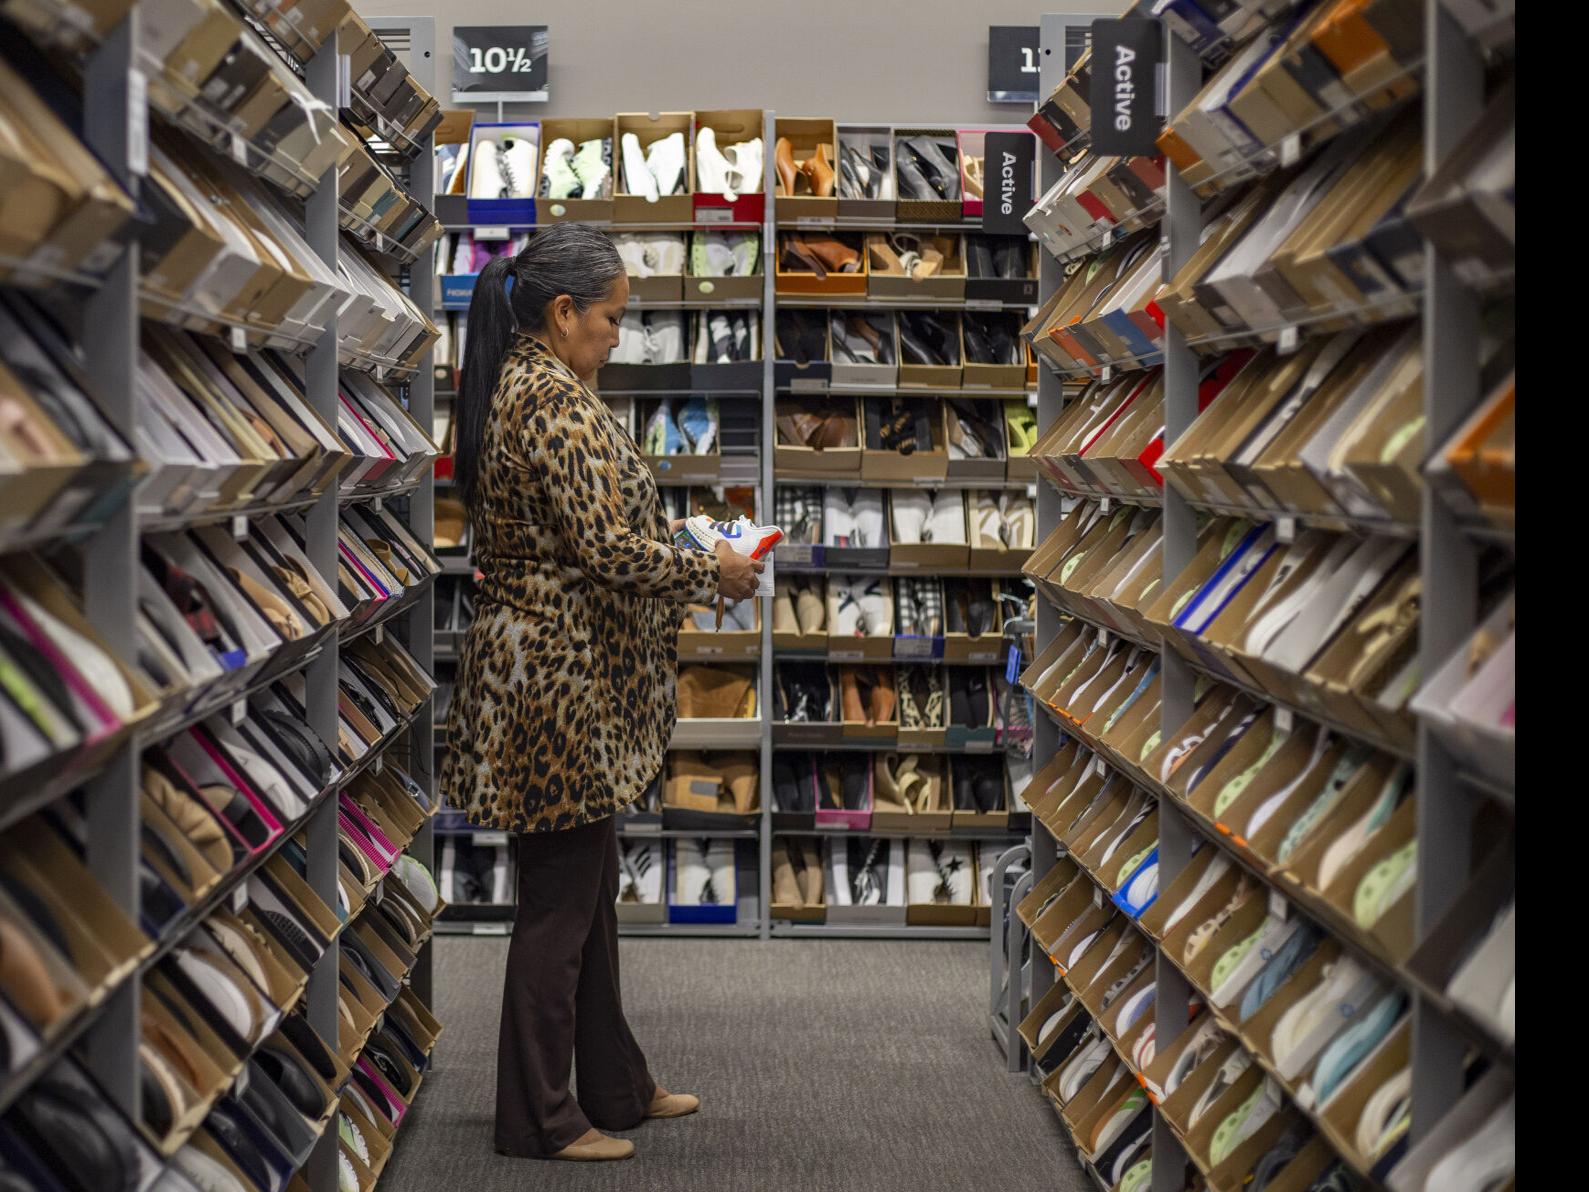 Here's Why Nordstrom Rack Coming to Yakima Is Good for Tri-Cities